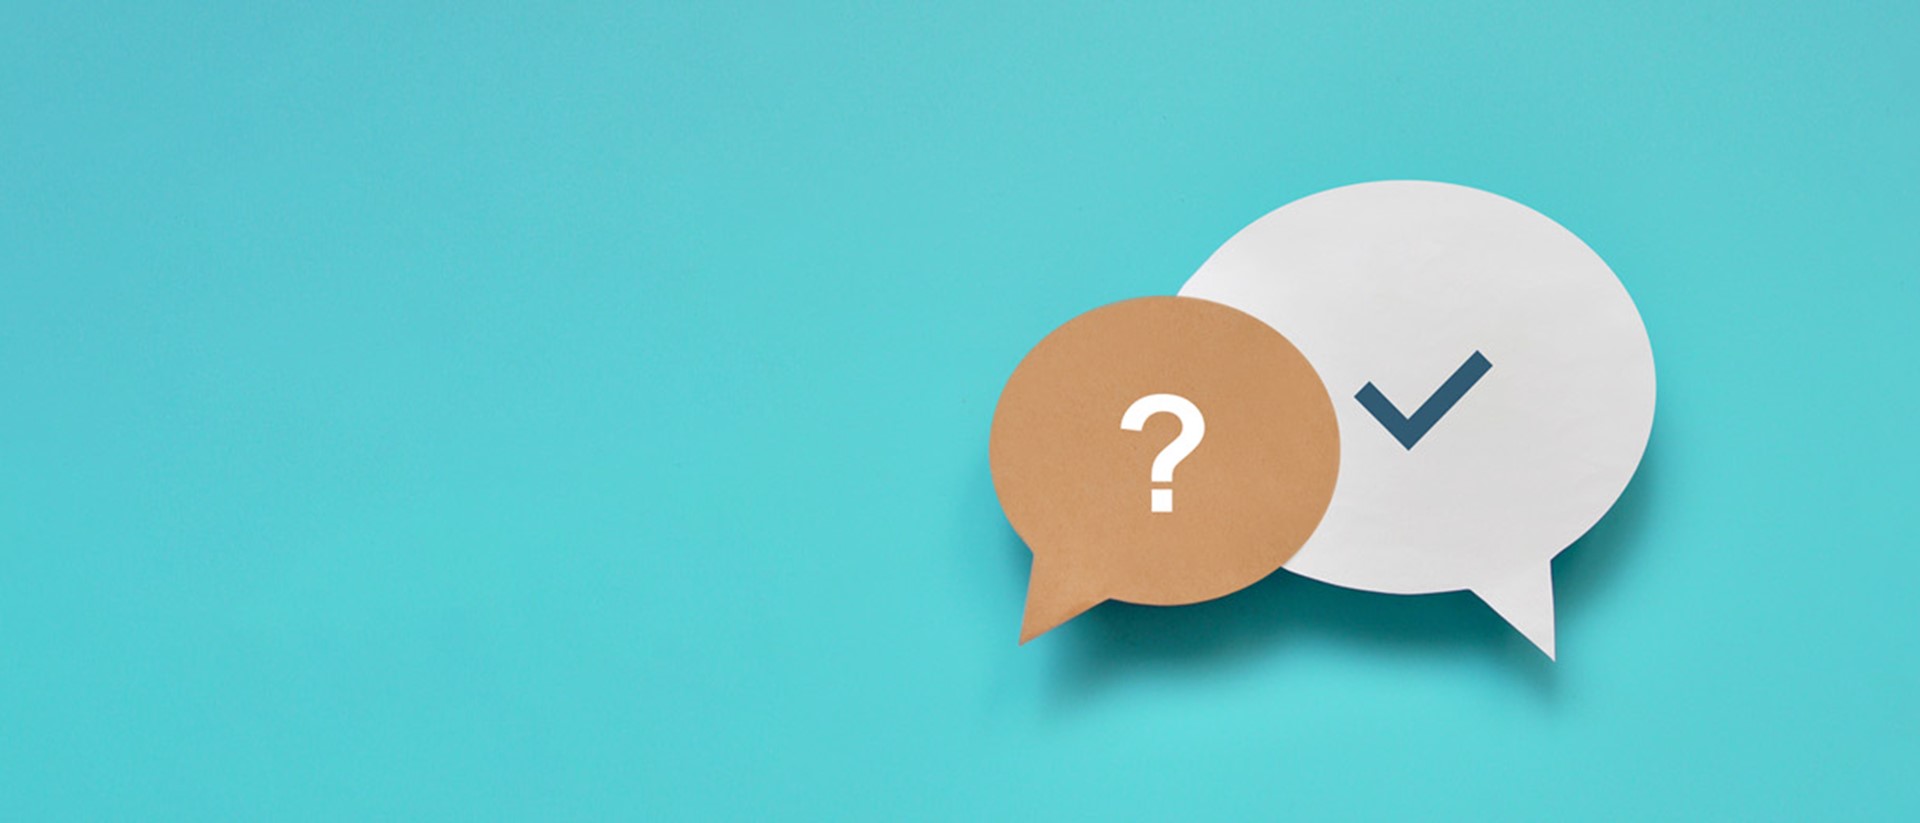 Two speech bubbles against a blue background, with the left one having a question mark and the right having a tick.